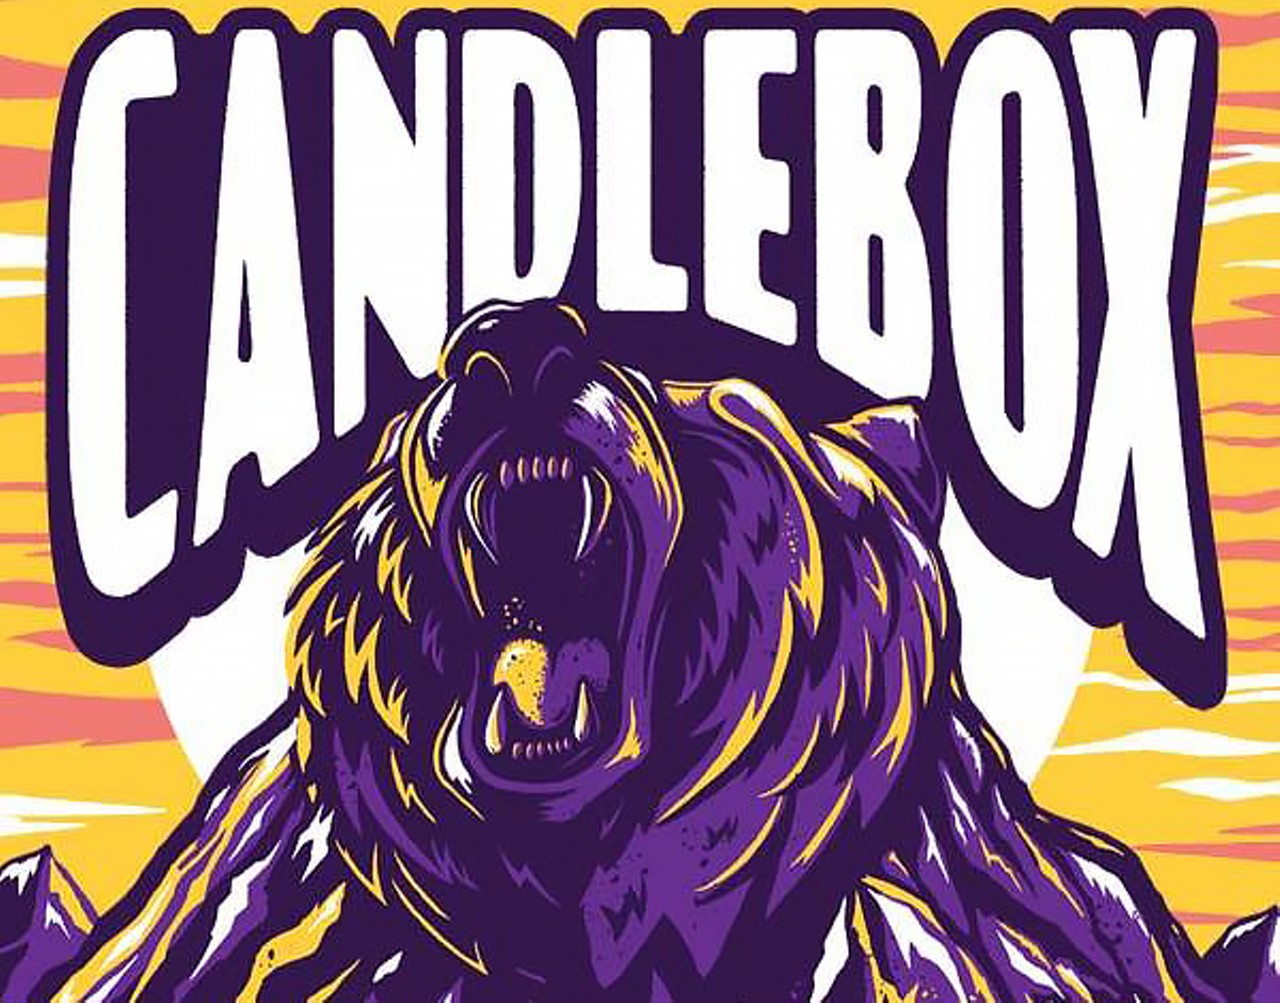 Candlebox at Jannus Live in St. PeteTravel back to the '90s with Candlebox. You know you want to.Thurs., Mar. 14, 8-11 p.m.
Photo via the Facebook event page